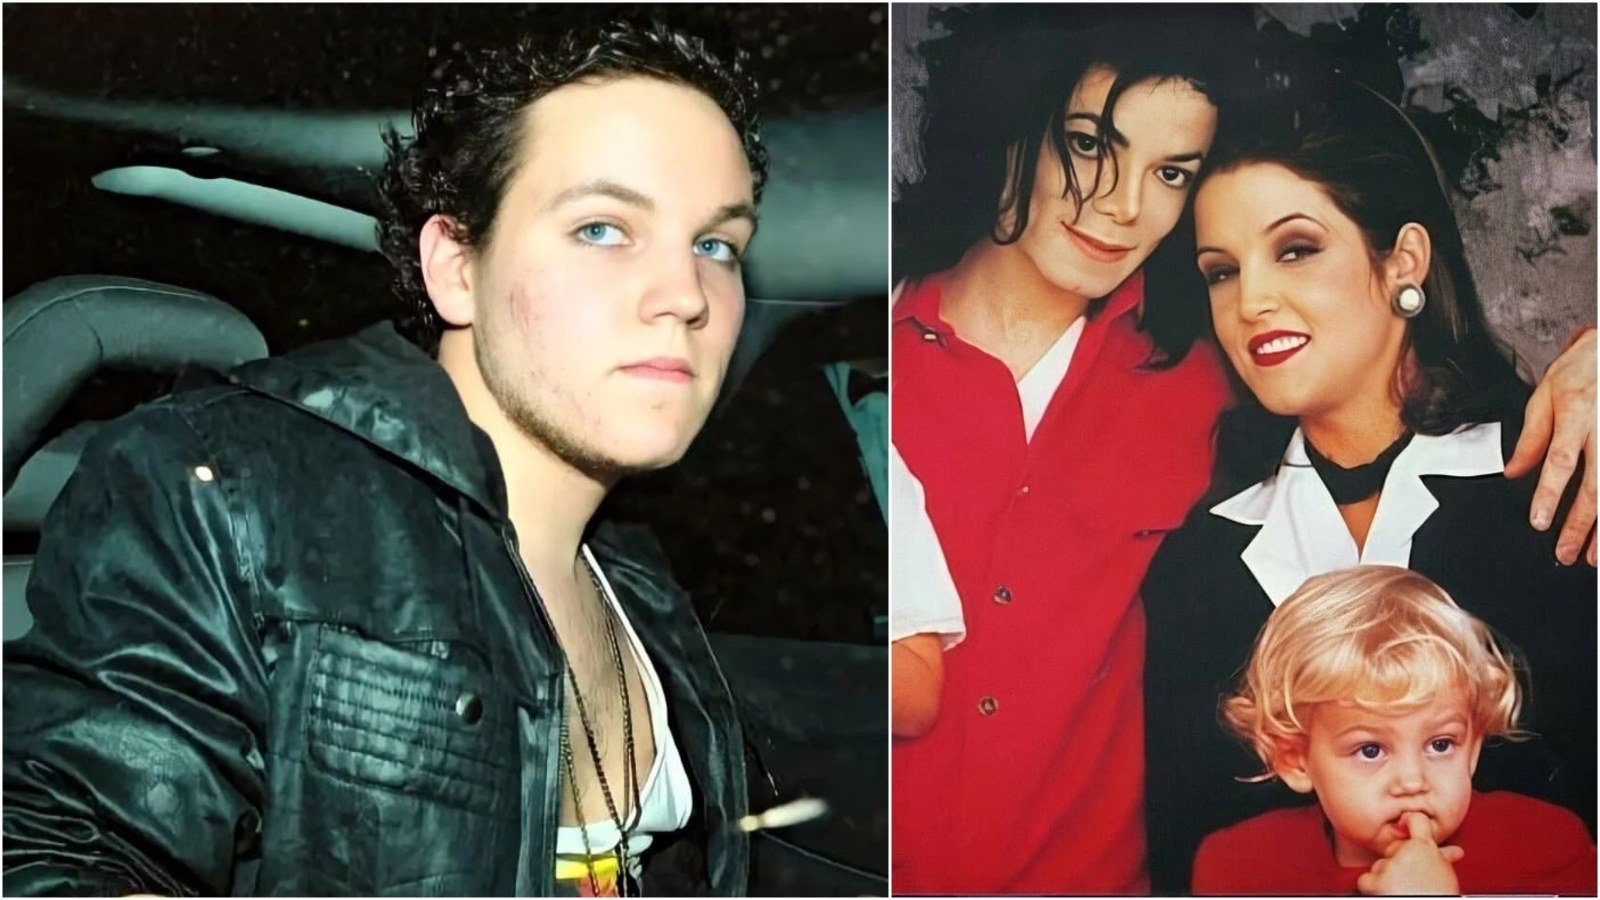 Tragic Benjamin Keough, son of Lisa Marie Presley (pictured right with her ex-husband Michael Jackson) was born into the world famous Presley family, but found the pressures too much to bear. Photos: @benjamin__storm; @lisaemichael/Instagram